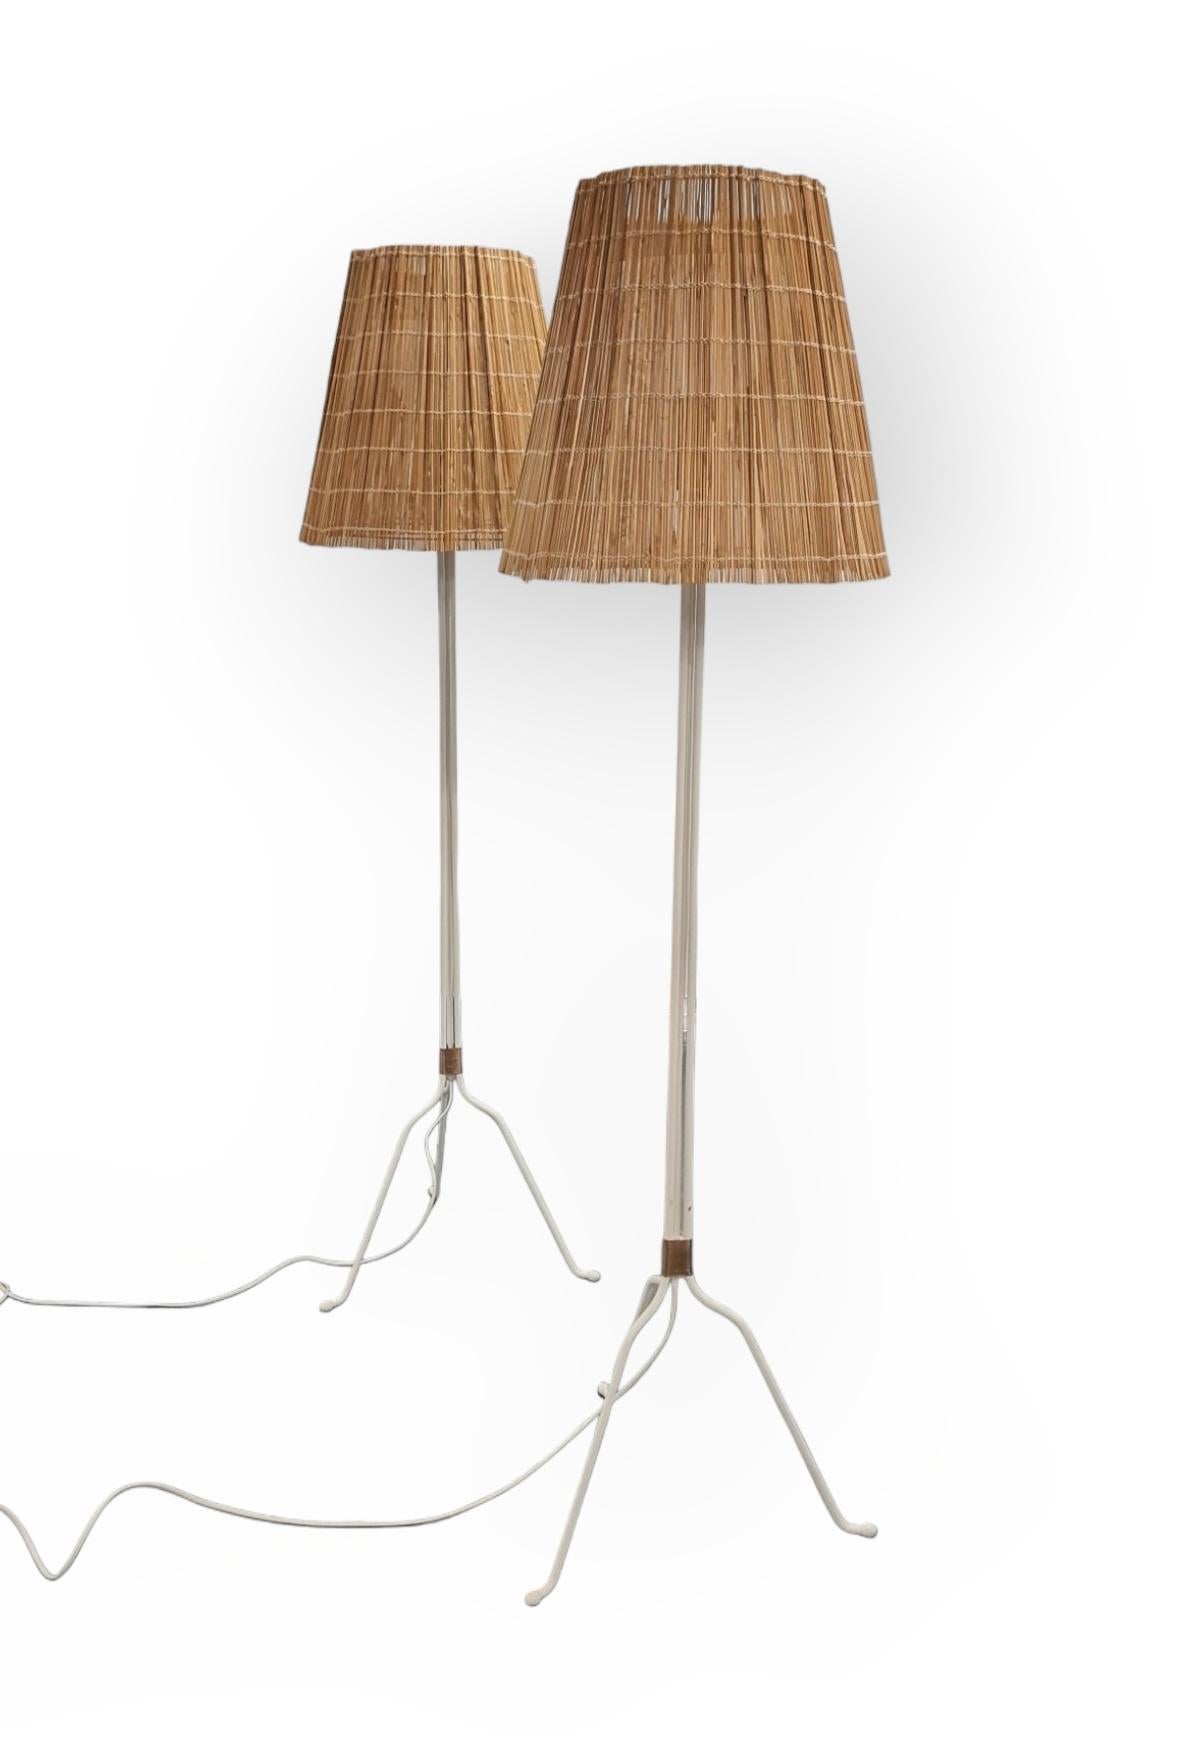 Metal Pair of Lisa Johansson-Papé floor lamps for Orno, model 30-058, 1950s